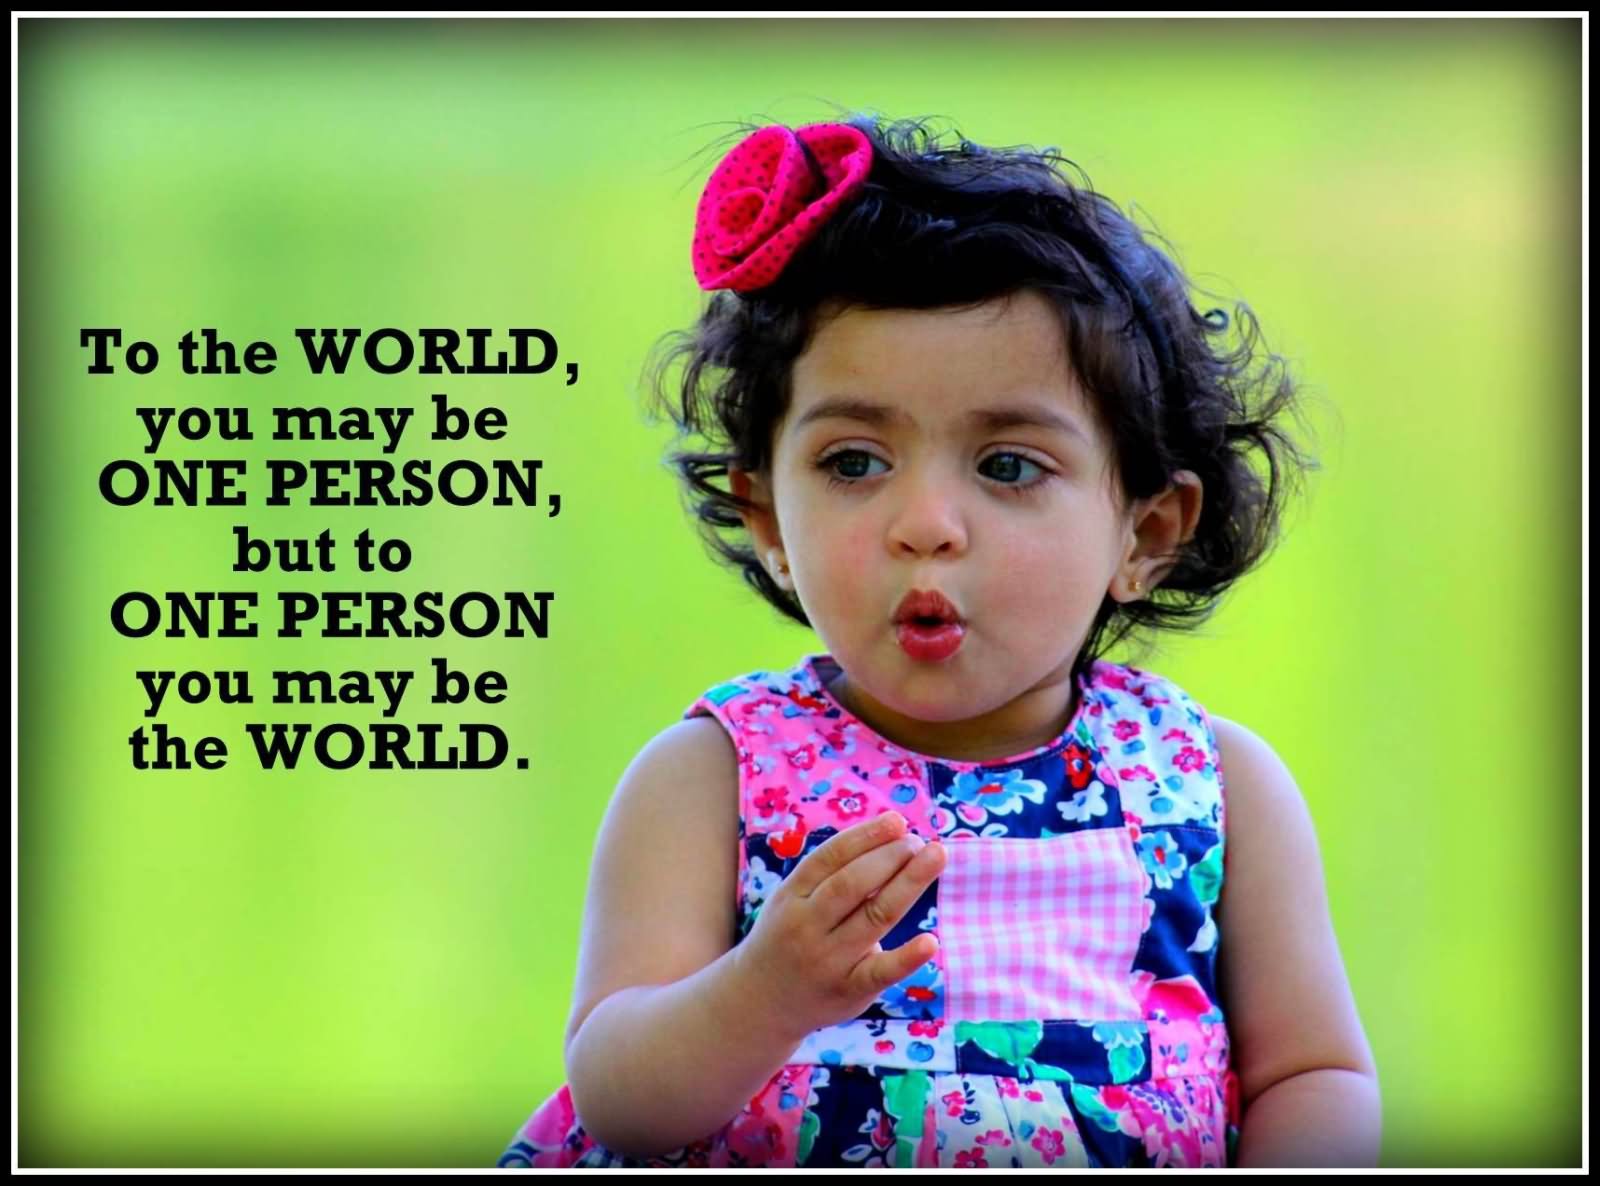 To the world you may be one person but to one person you may be the world.  - Bill Wilson